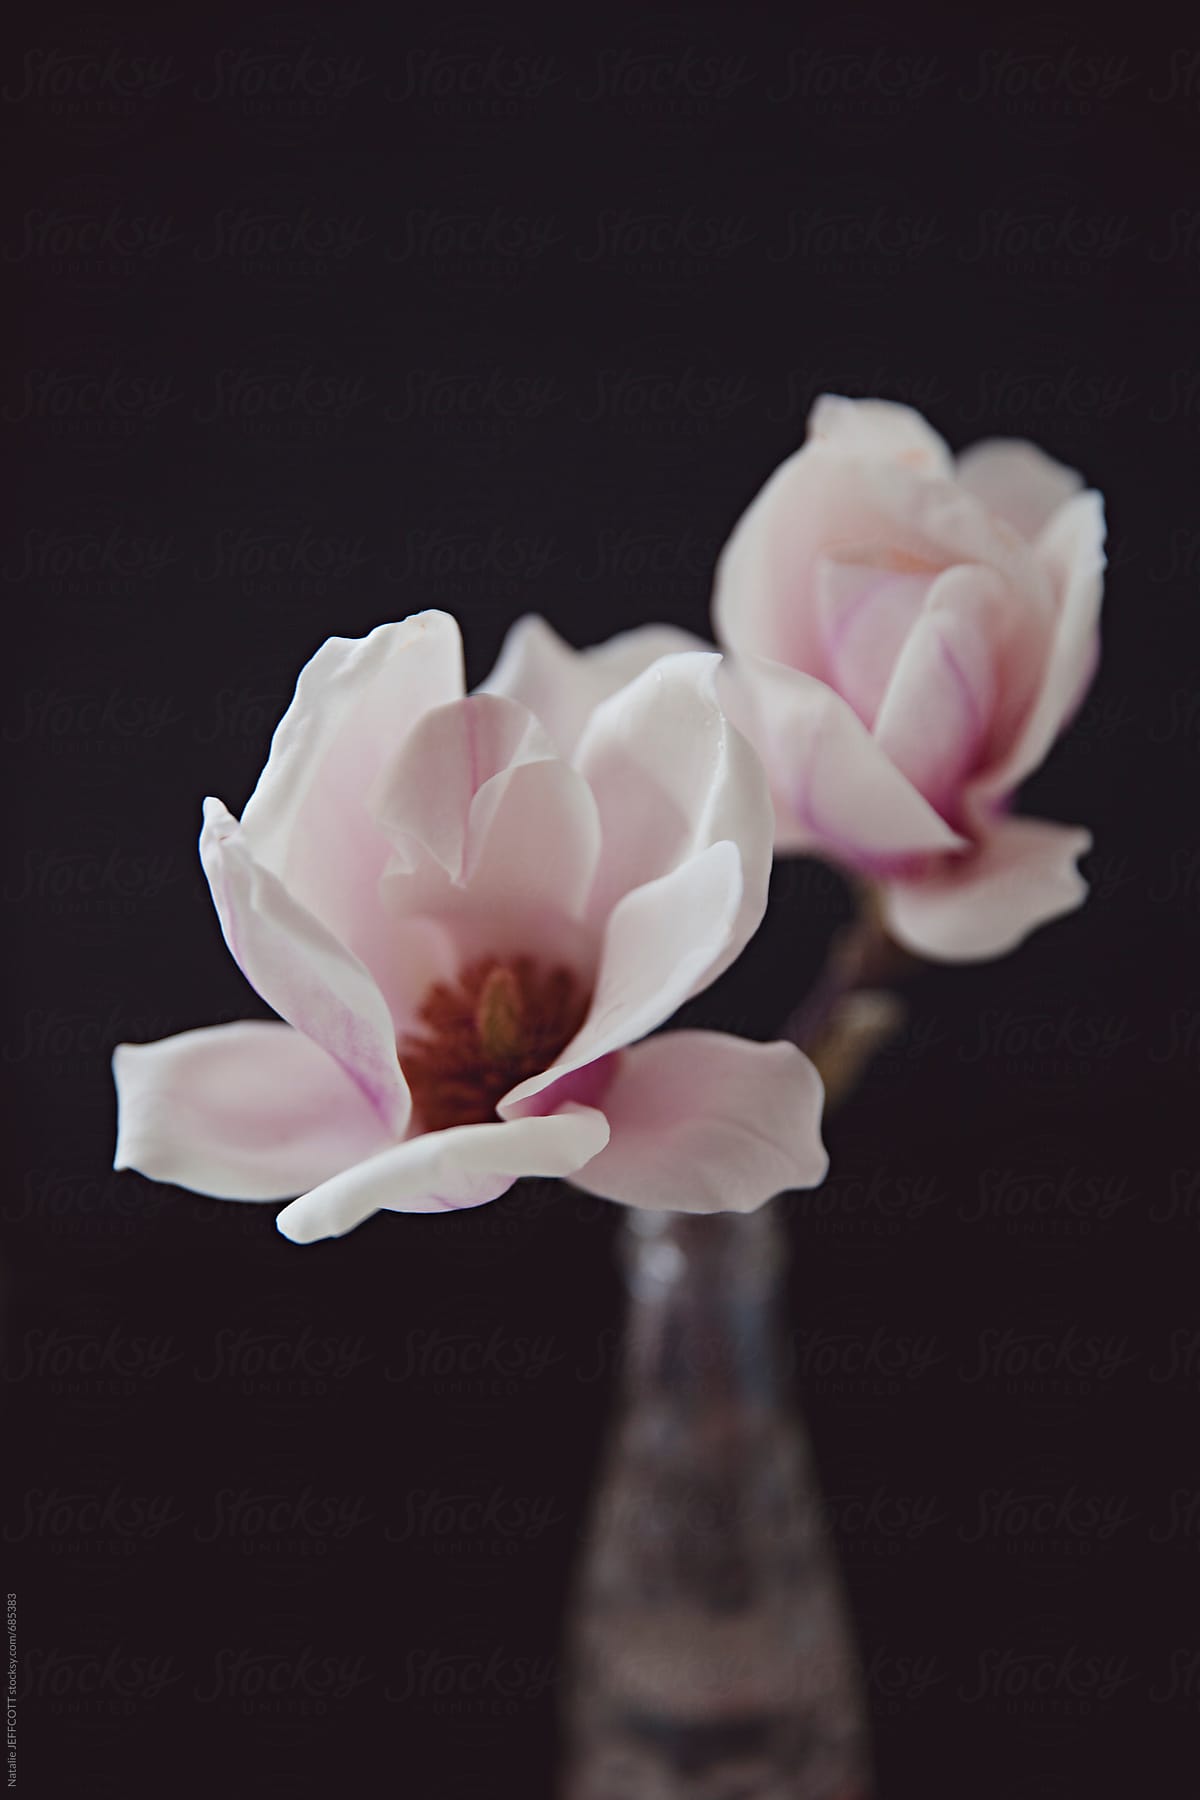 close up of hand picked magnolia flowers in bloom